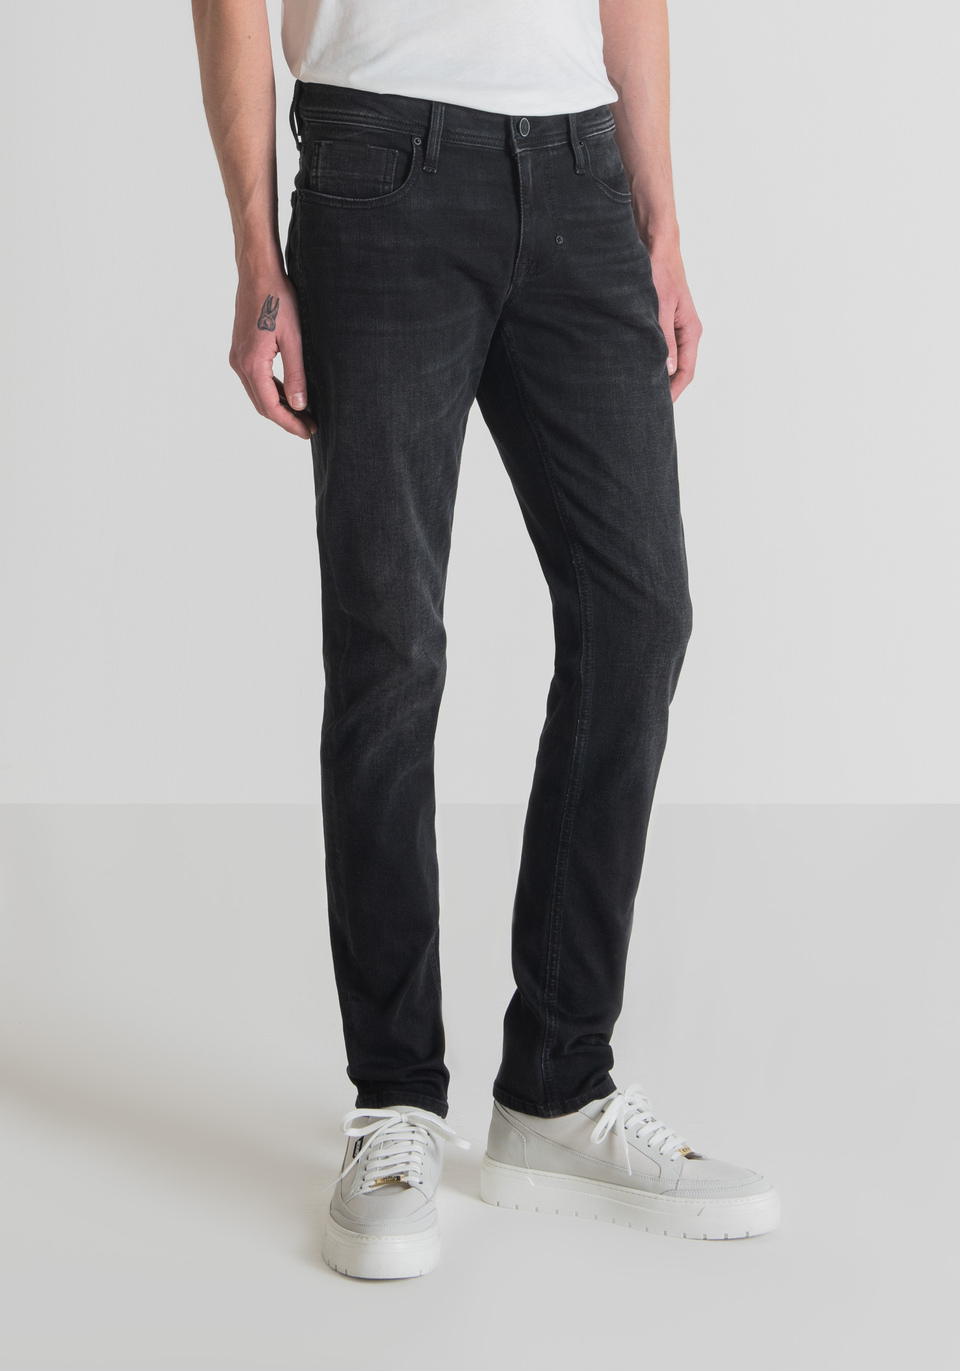 "OZZY" TAPERED FIT JEANS IN POWER STRETCH DENIM BLEND WITH BLACK WASH - Antony Morato Online Shop